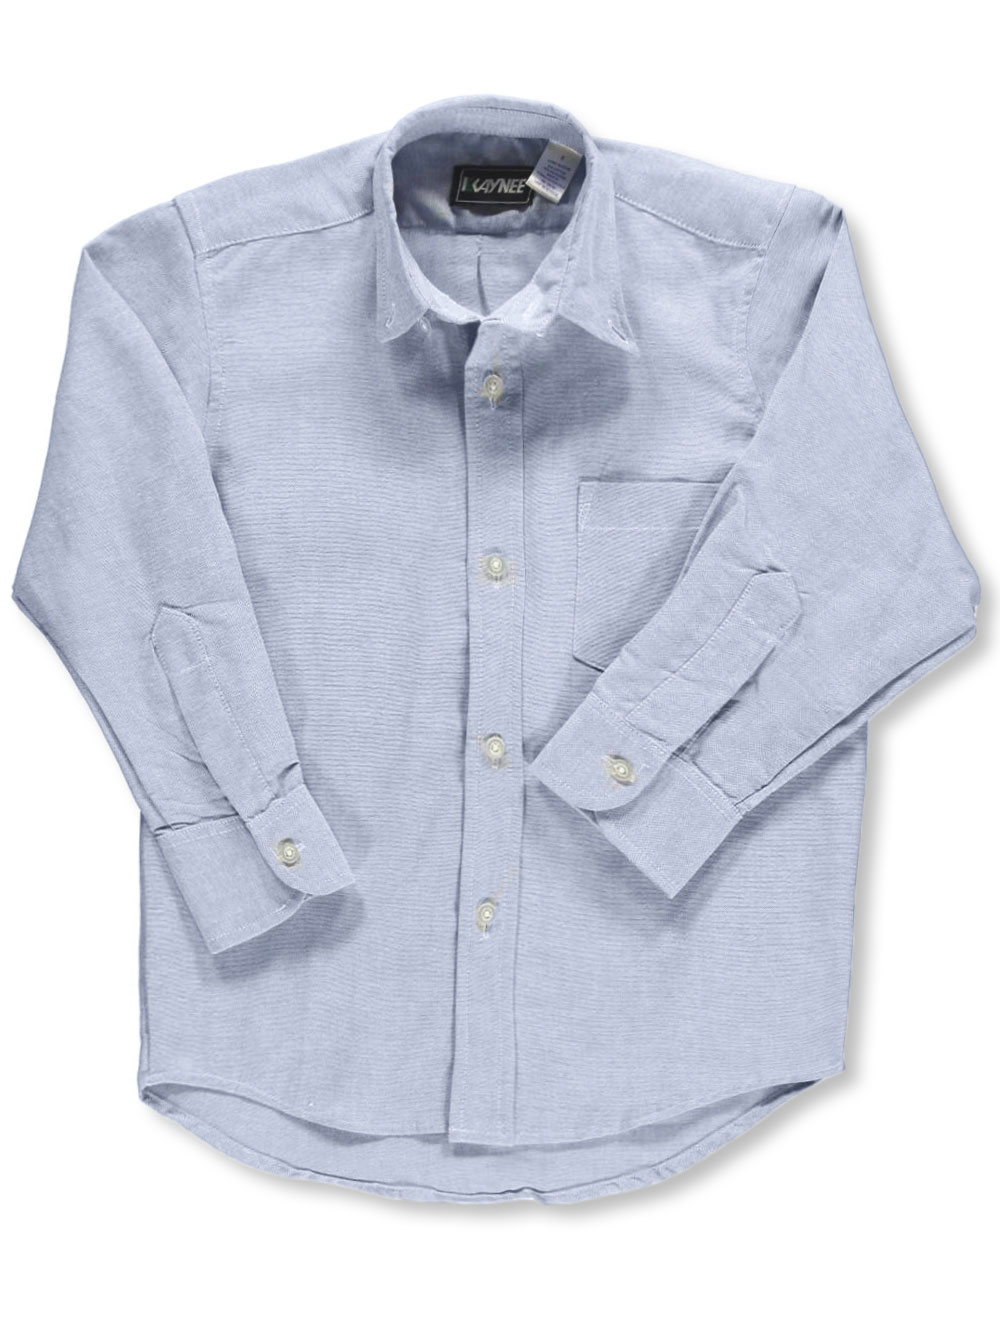 Size 8 Button-Downs for Boys